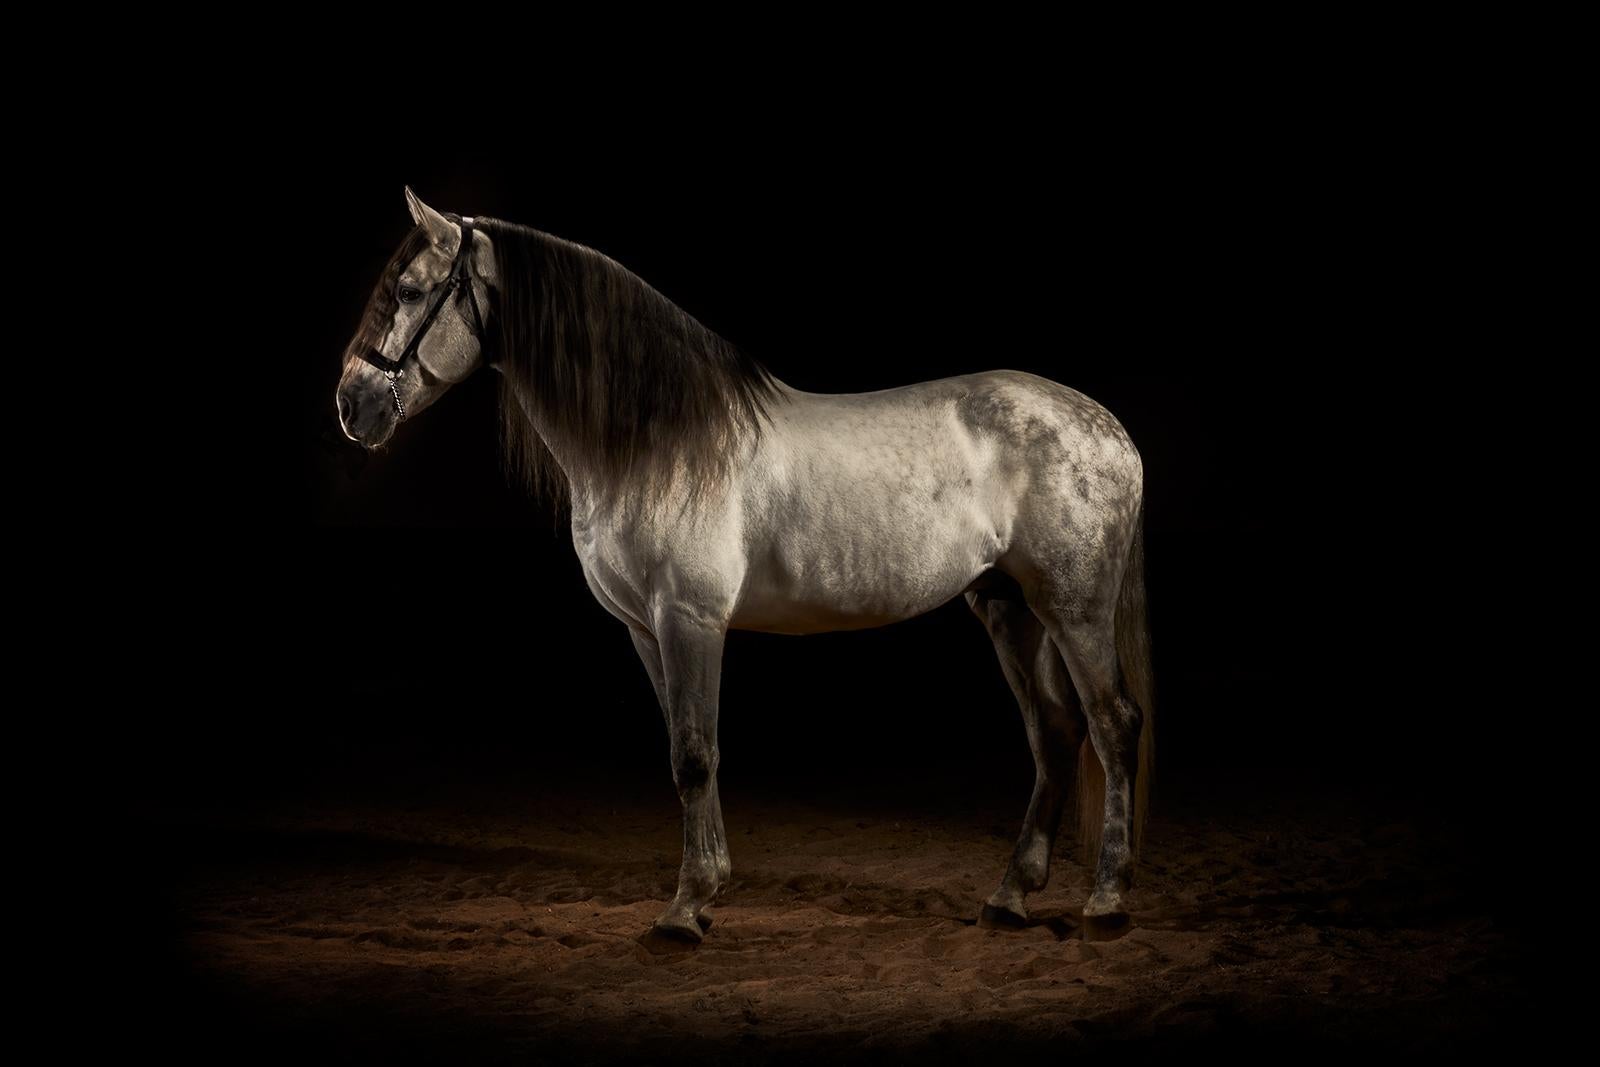 Horse 2- Signed limited edition archival pigment print,  Edition of 5  
Horse photographed on location using studio lighting.

This is an Archival Pigment print on fiber based paper ( Hahnemühle Photo Rag® Baryta 315 gsm , Acid-free and lignin-free